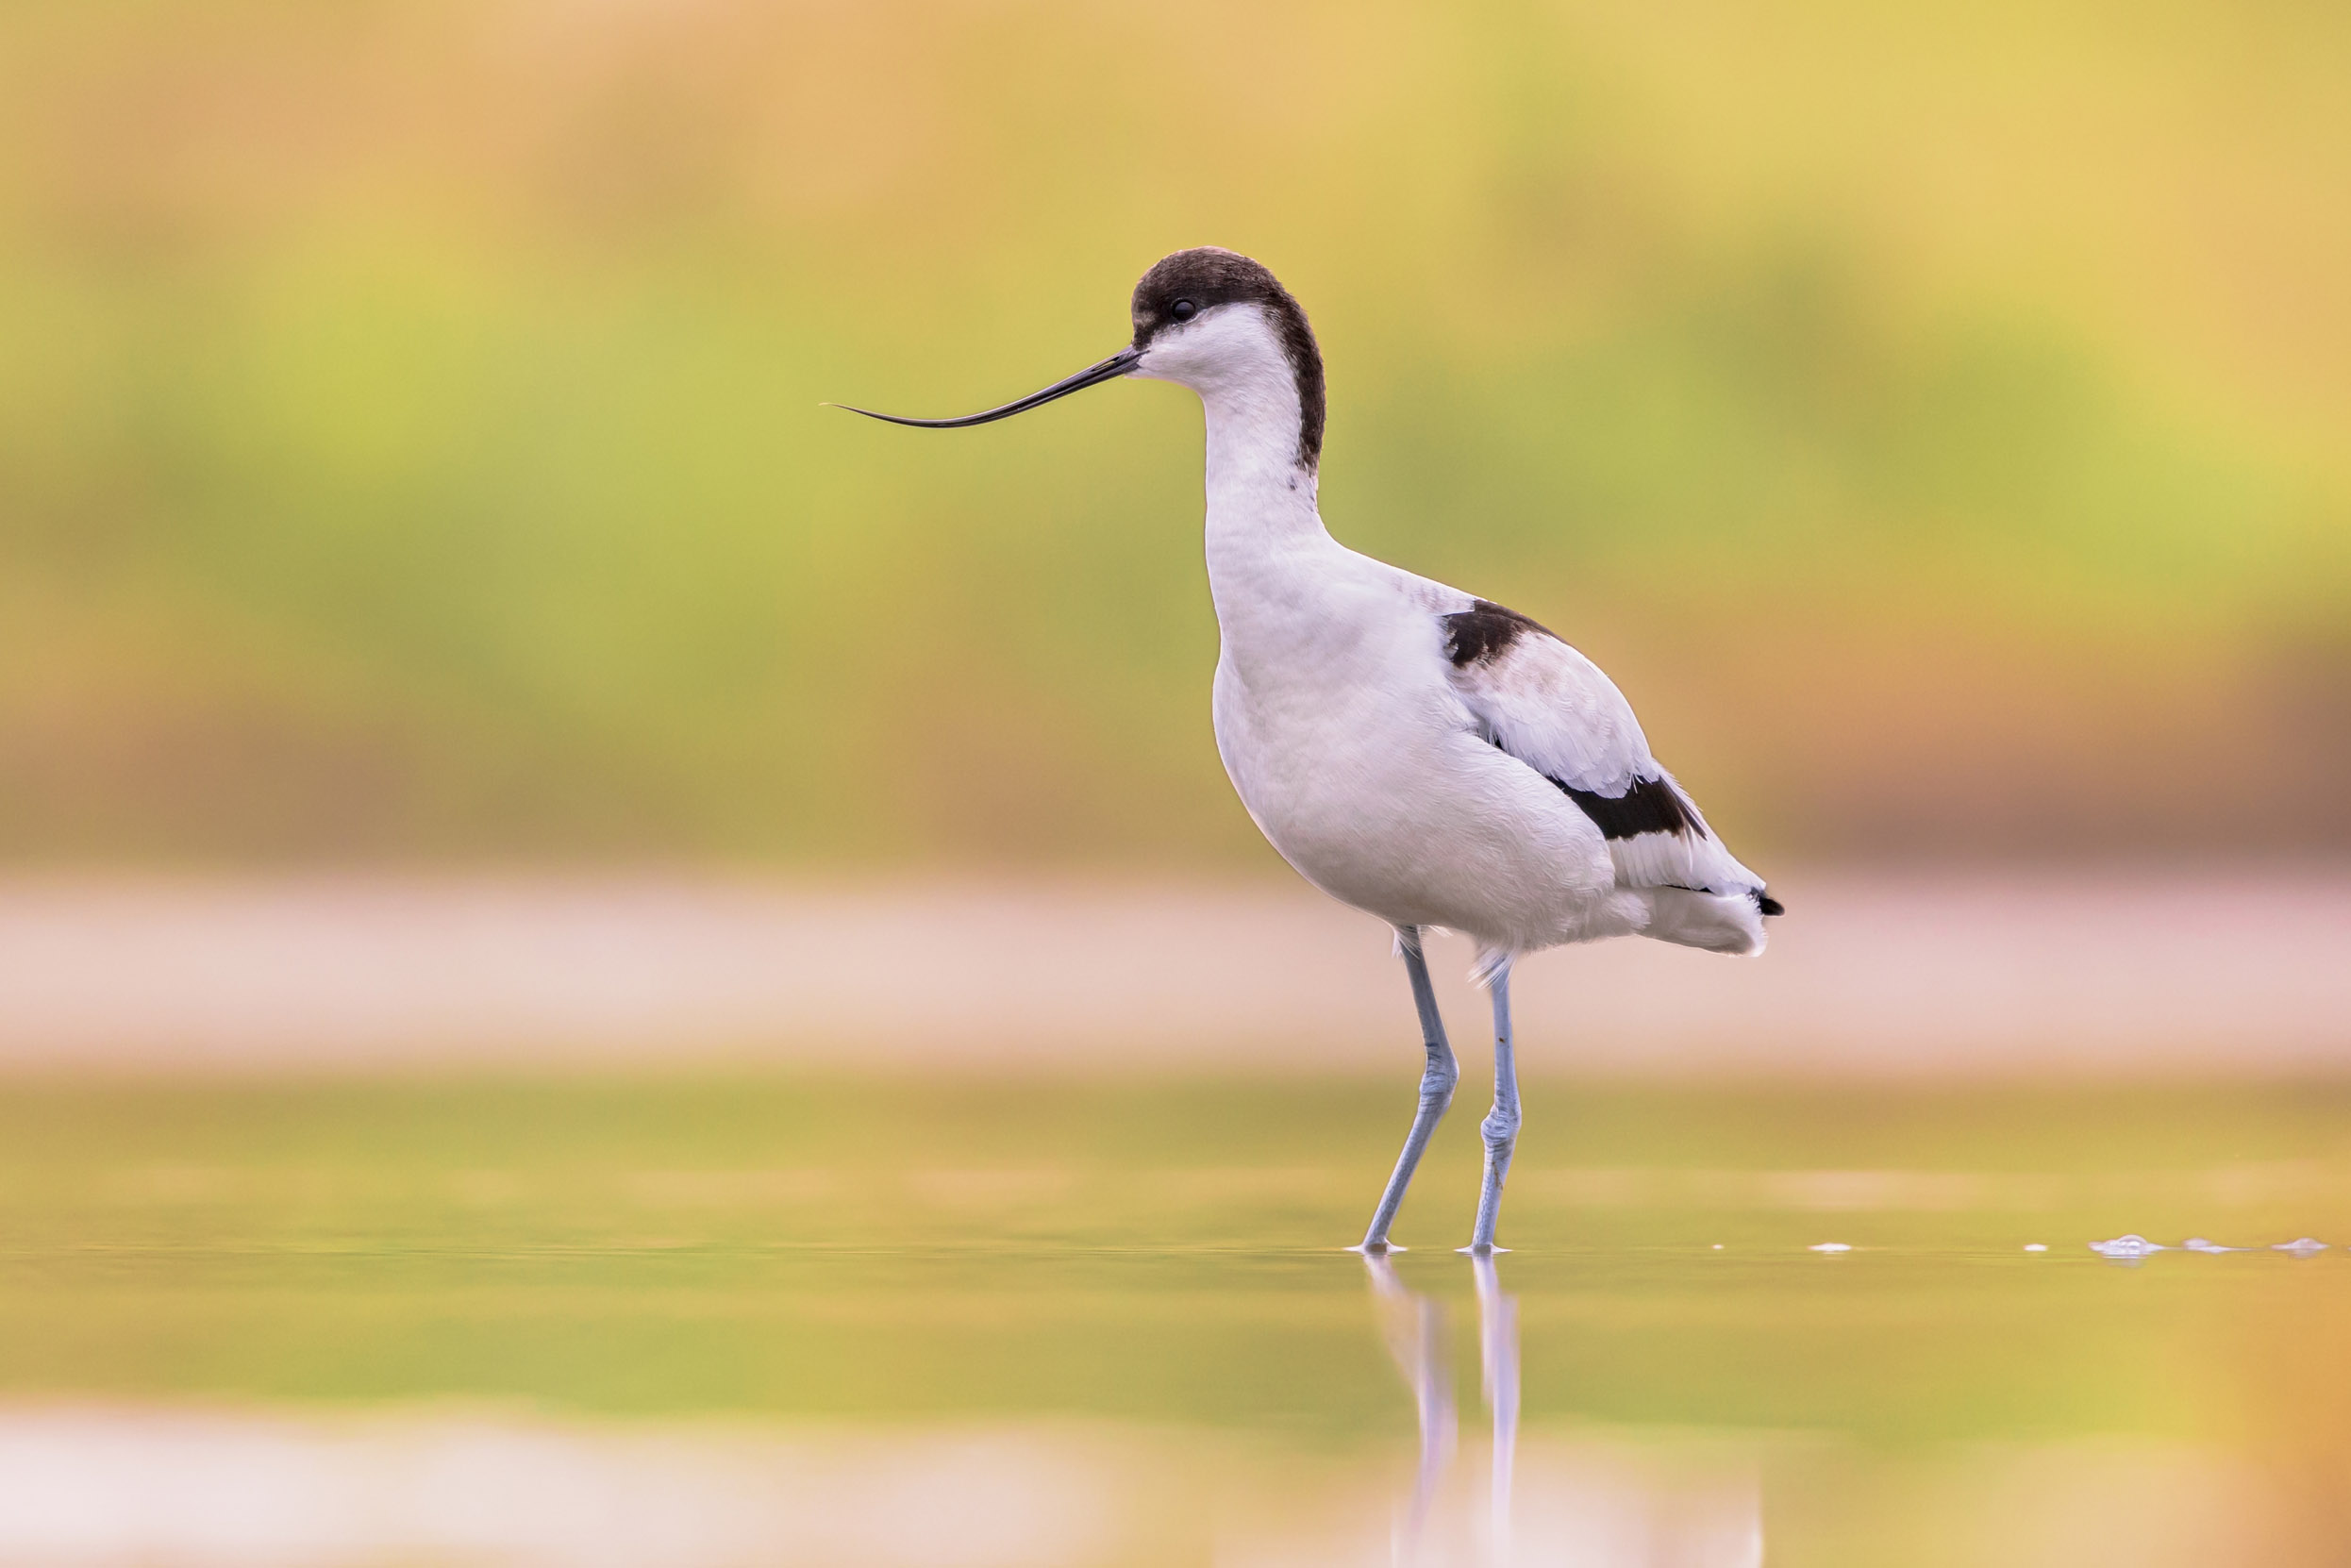 A lone Avocet stood in shallow waters, with orange reflection.